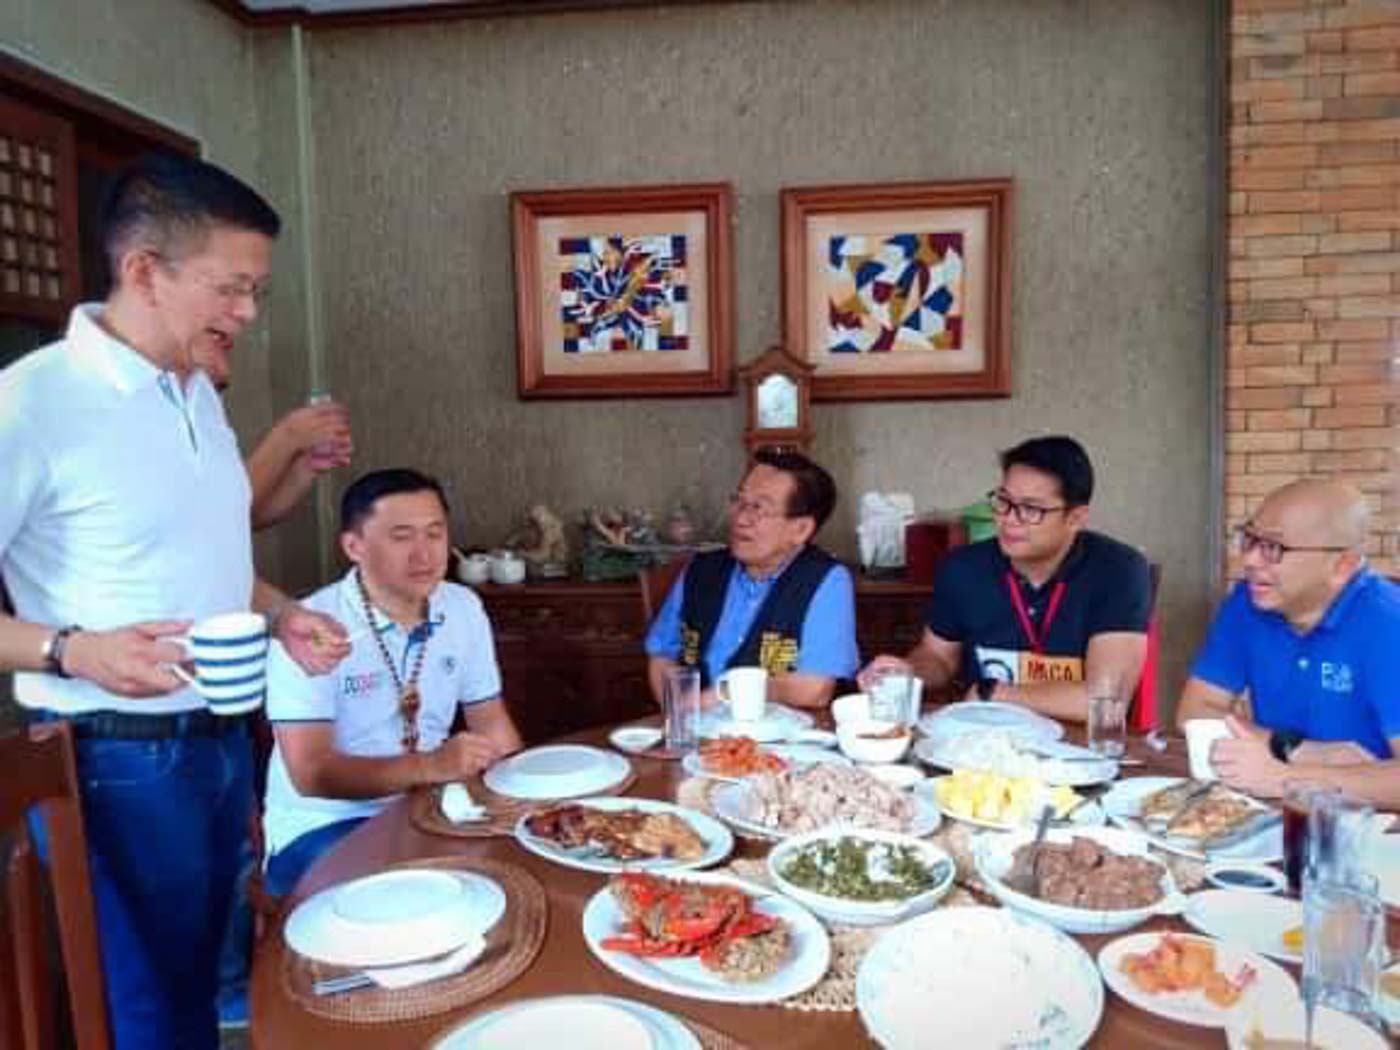 DINING TOGETHER. Senator Francis Escudero hosts senatorial candidates Bong Go, Romy Macalintal, and Florin Hilbay in his residence in Sorsogon on March 31, 2019. All photos by Rhaydz Barcia/Rappler  